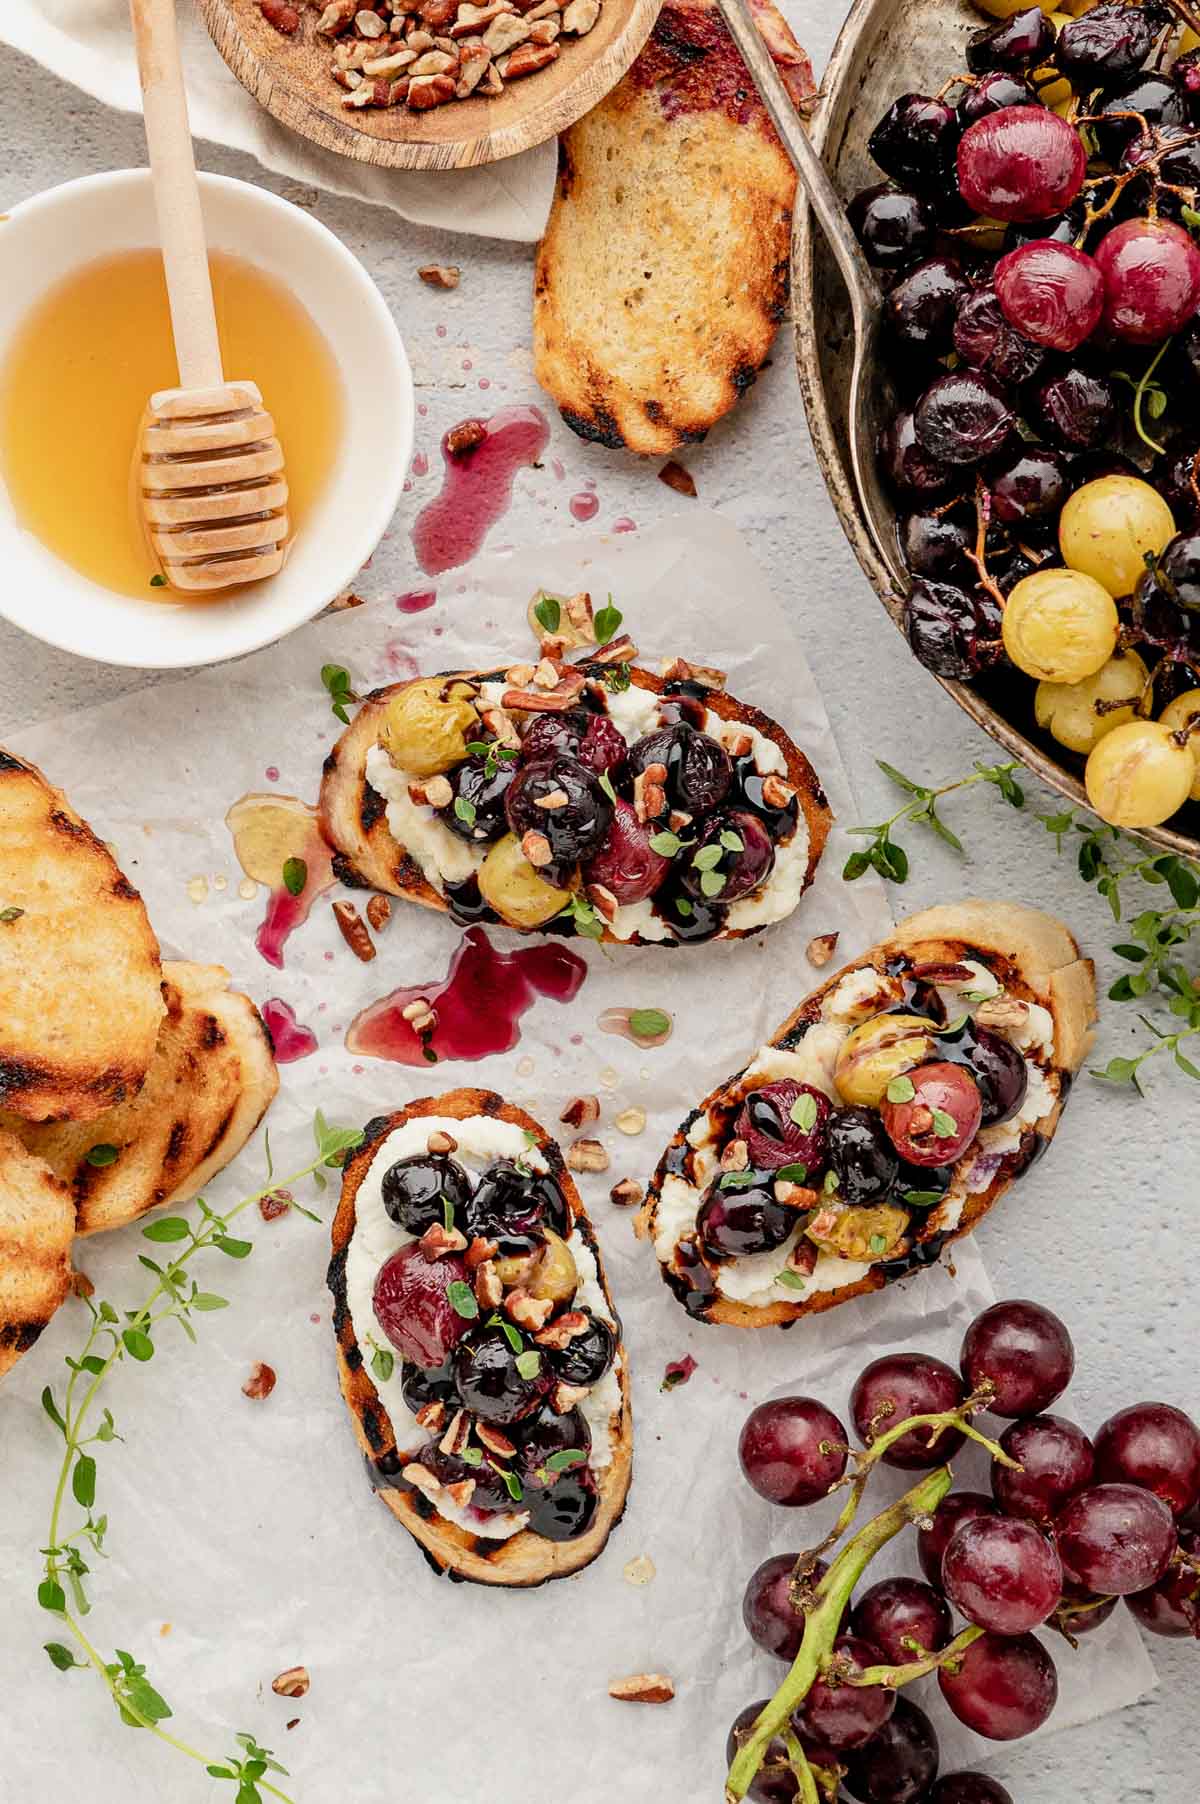 Crostini toasts with ricotta cheese and roasted grapes.